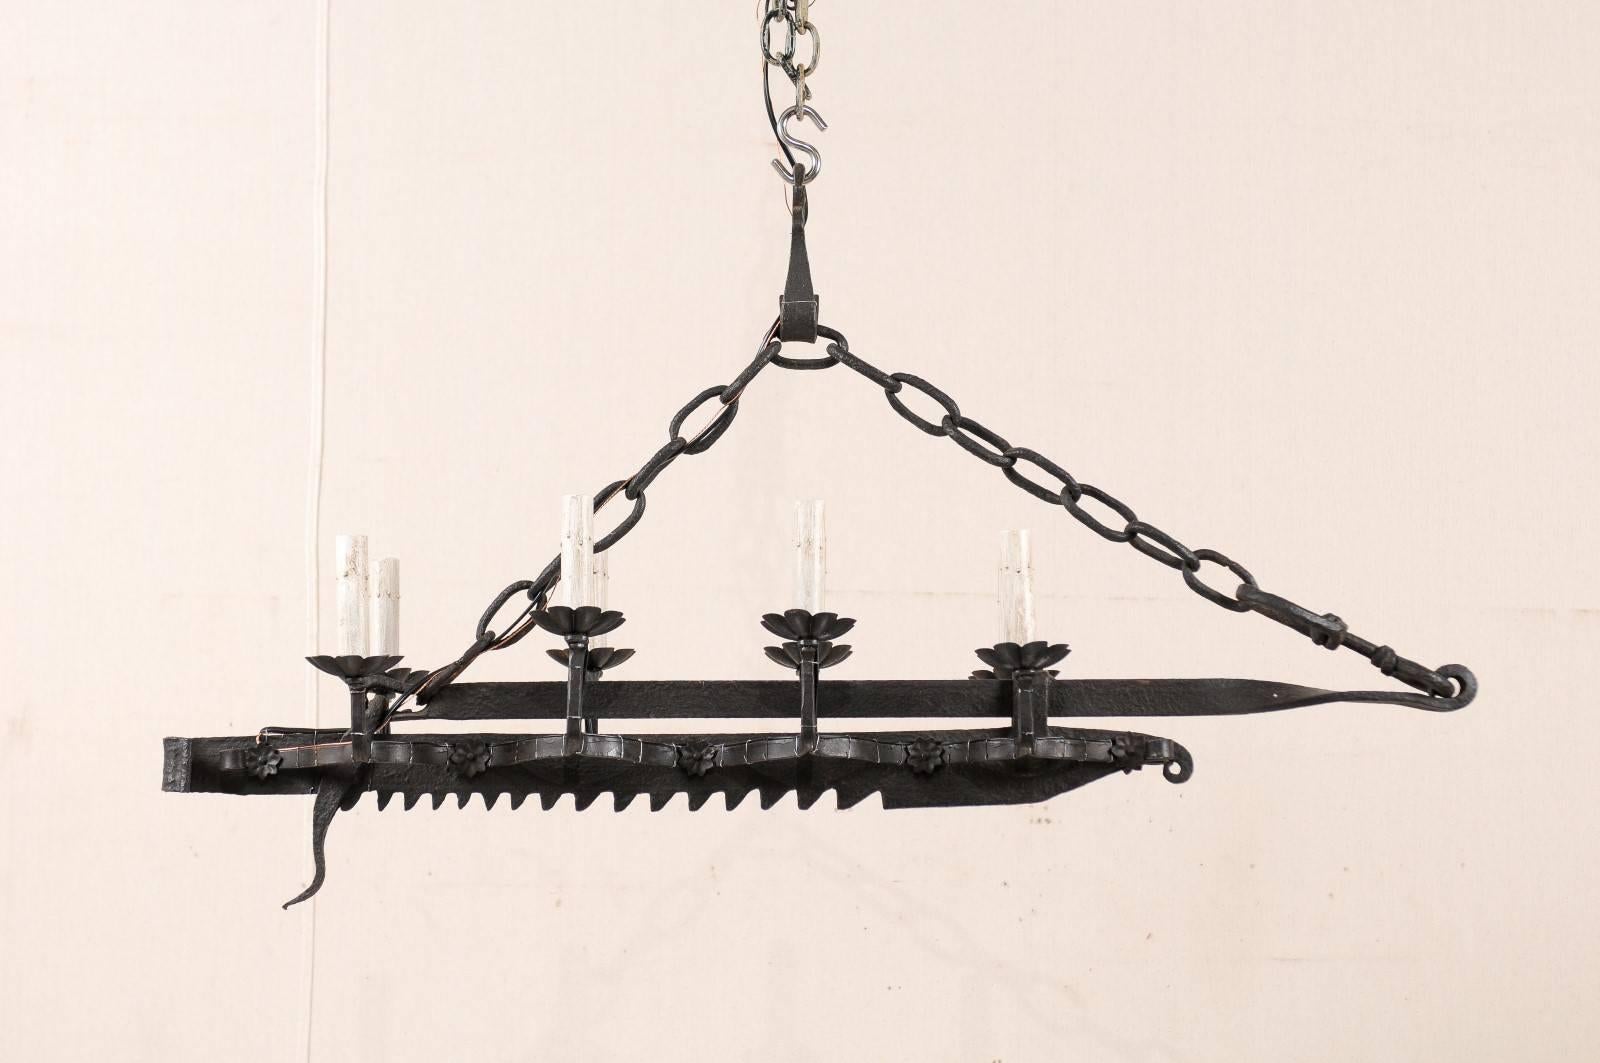 A French Mid-Century, eight-light forged-iron chandelier made from a 19th century spit-jack. A spit-jack is a type of rotisserie that was once common in fireplaces. This chandelier has eight arms, four on each side, which connect to the central